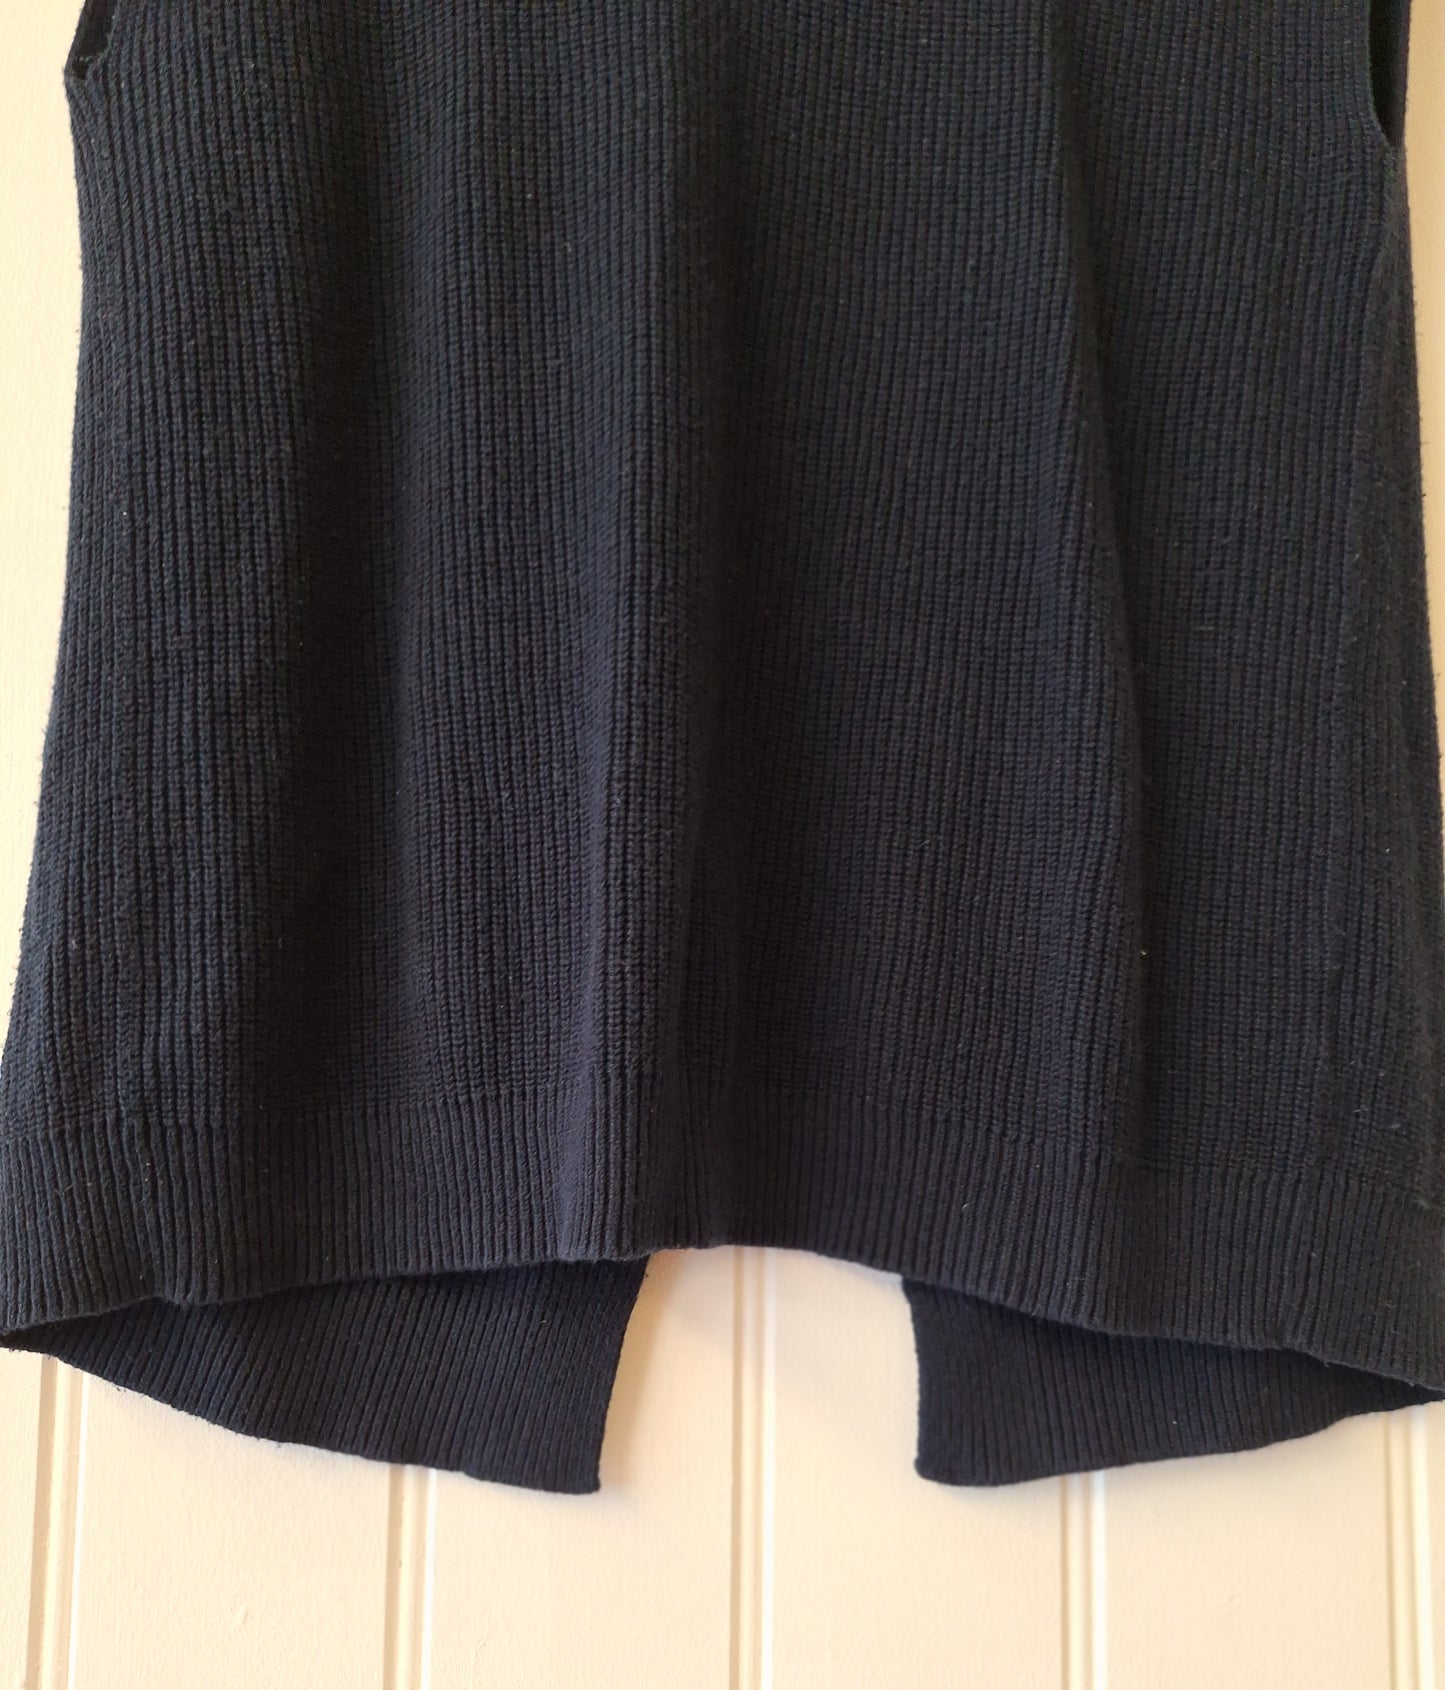 White label for White Company navy knit 10